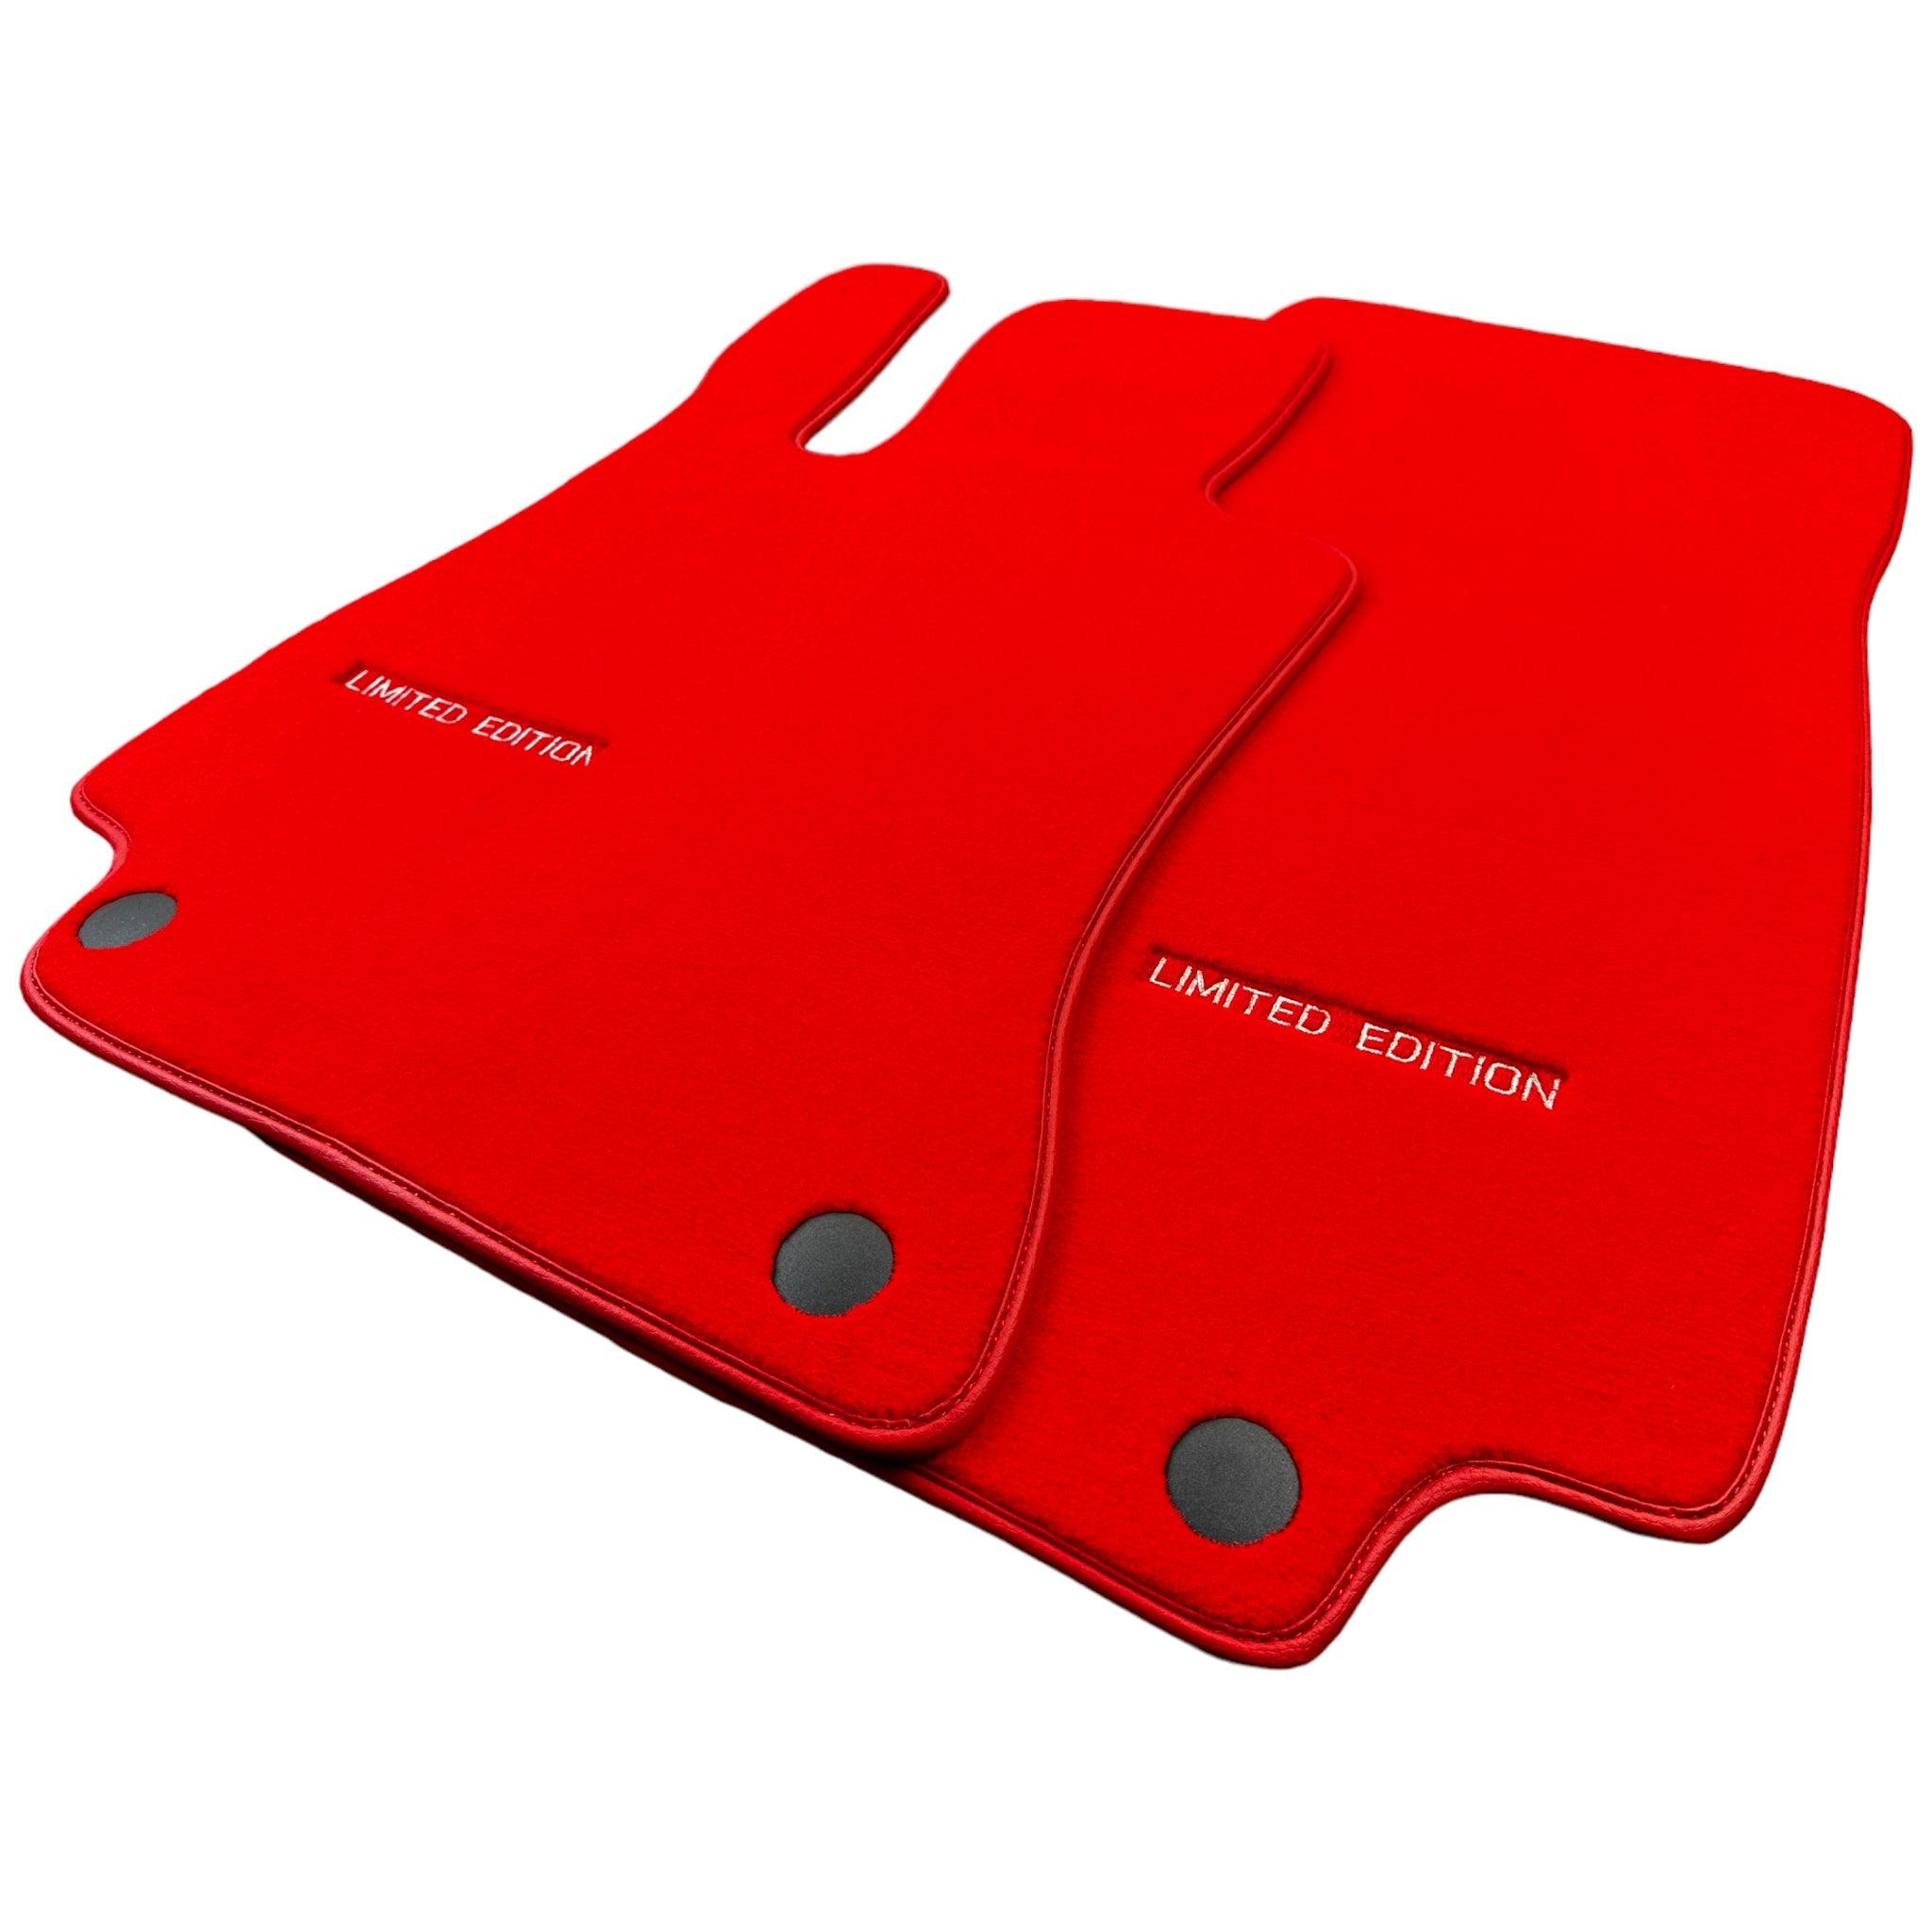 Red Floor Mats For Mercedes Benz GL-Class X166 (2012-2015) | Limited Edition